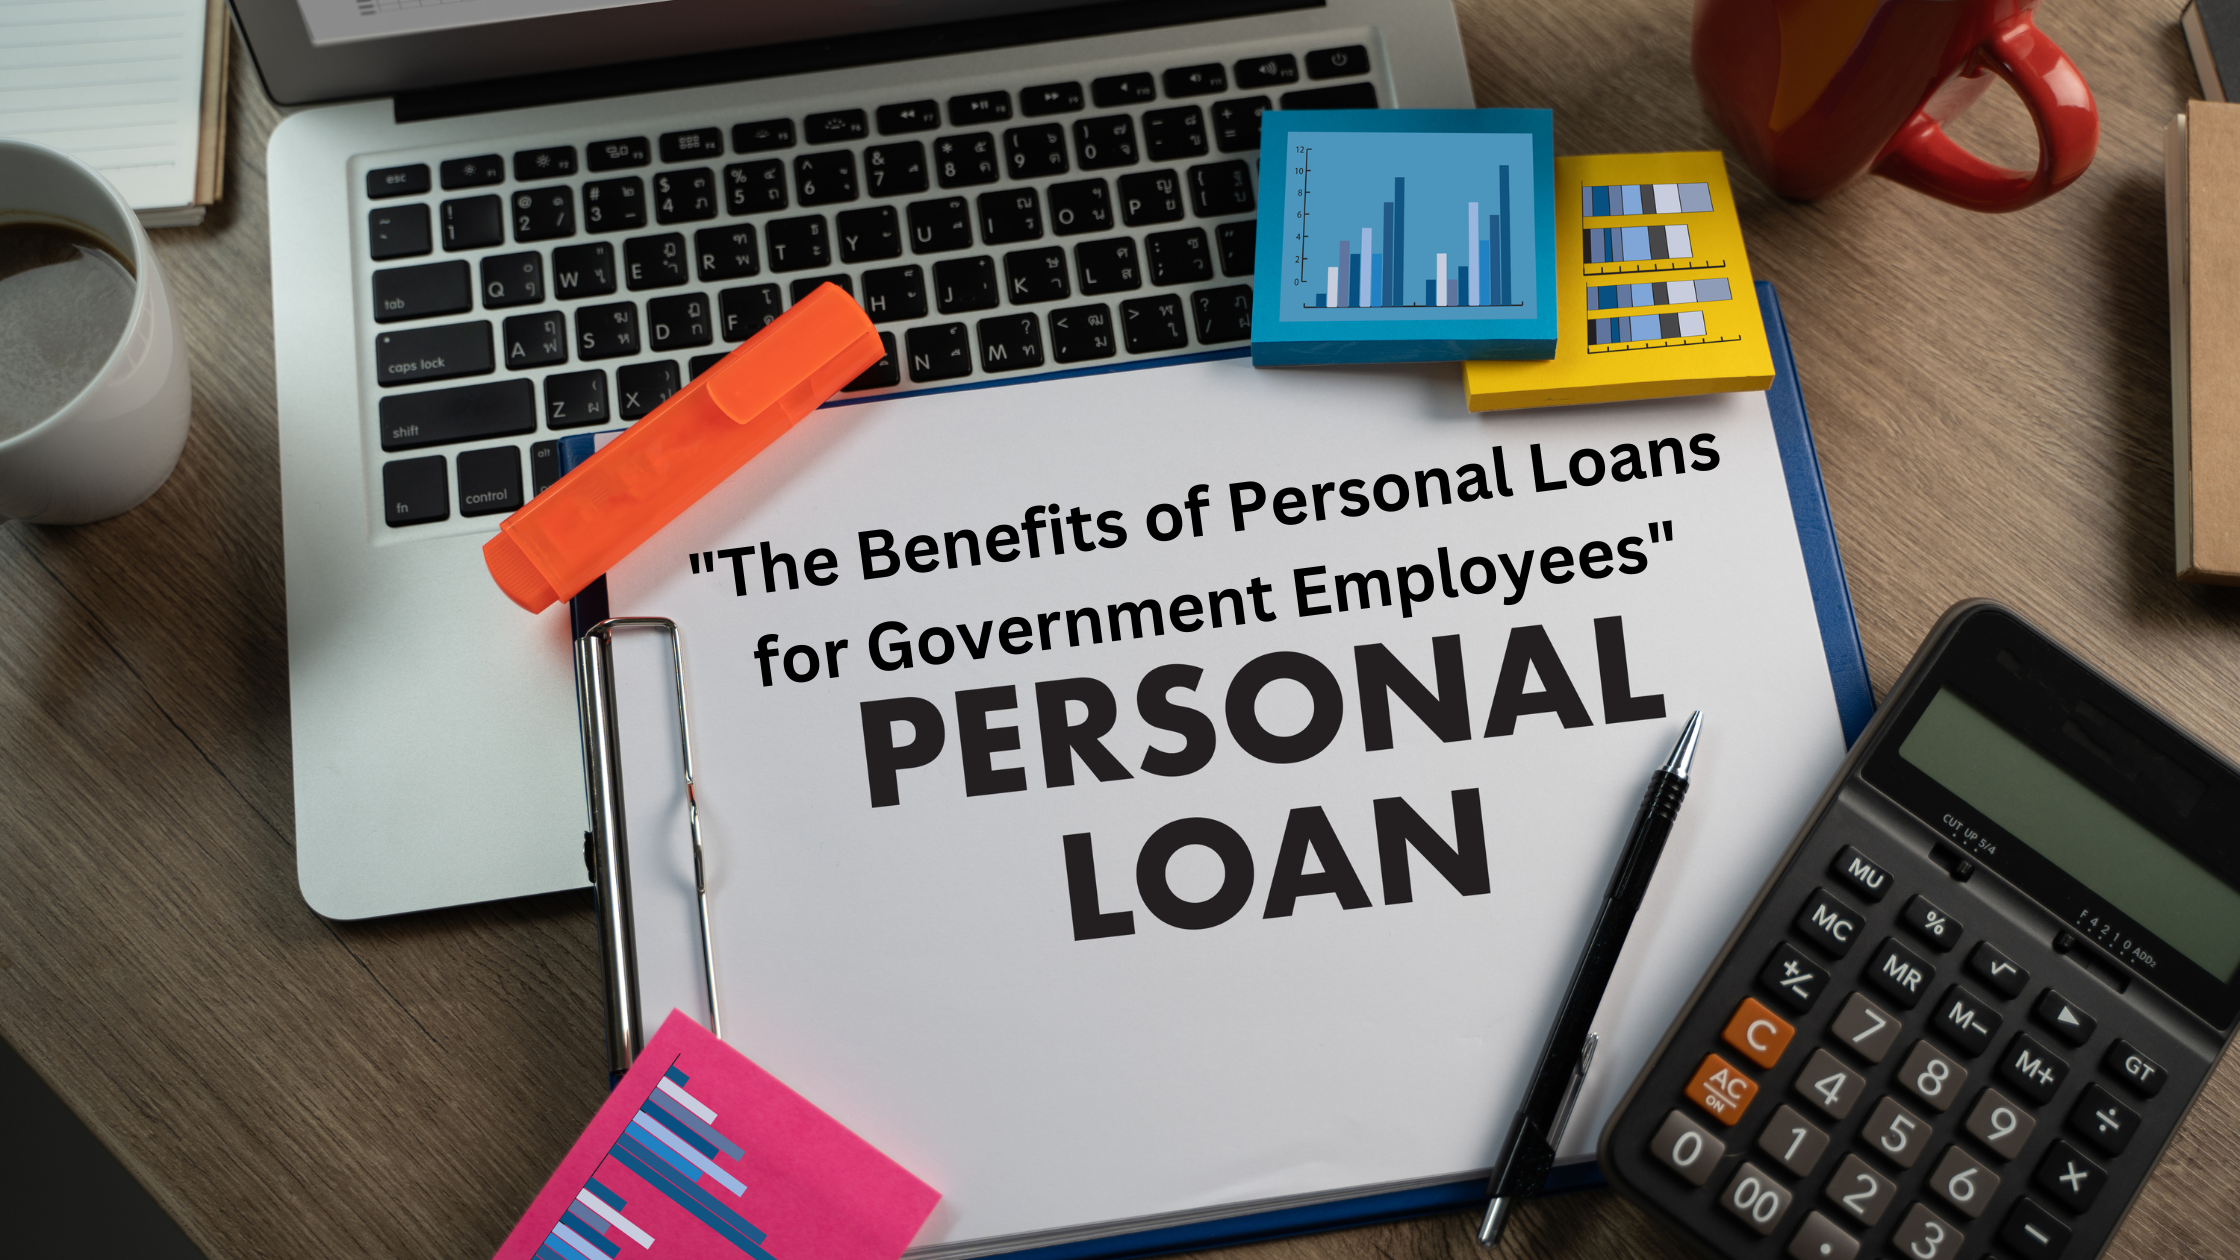 What are the benefits of personal loans for Government Employees